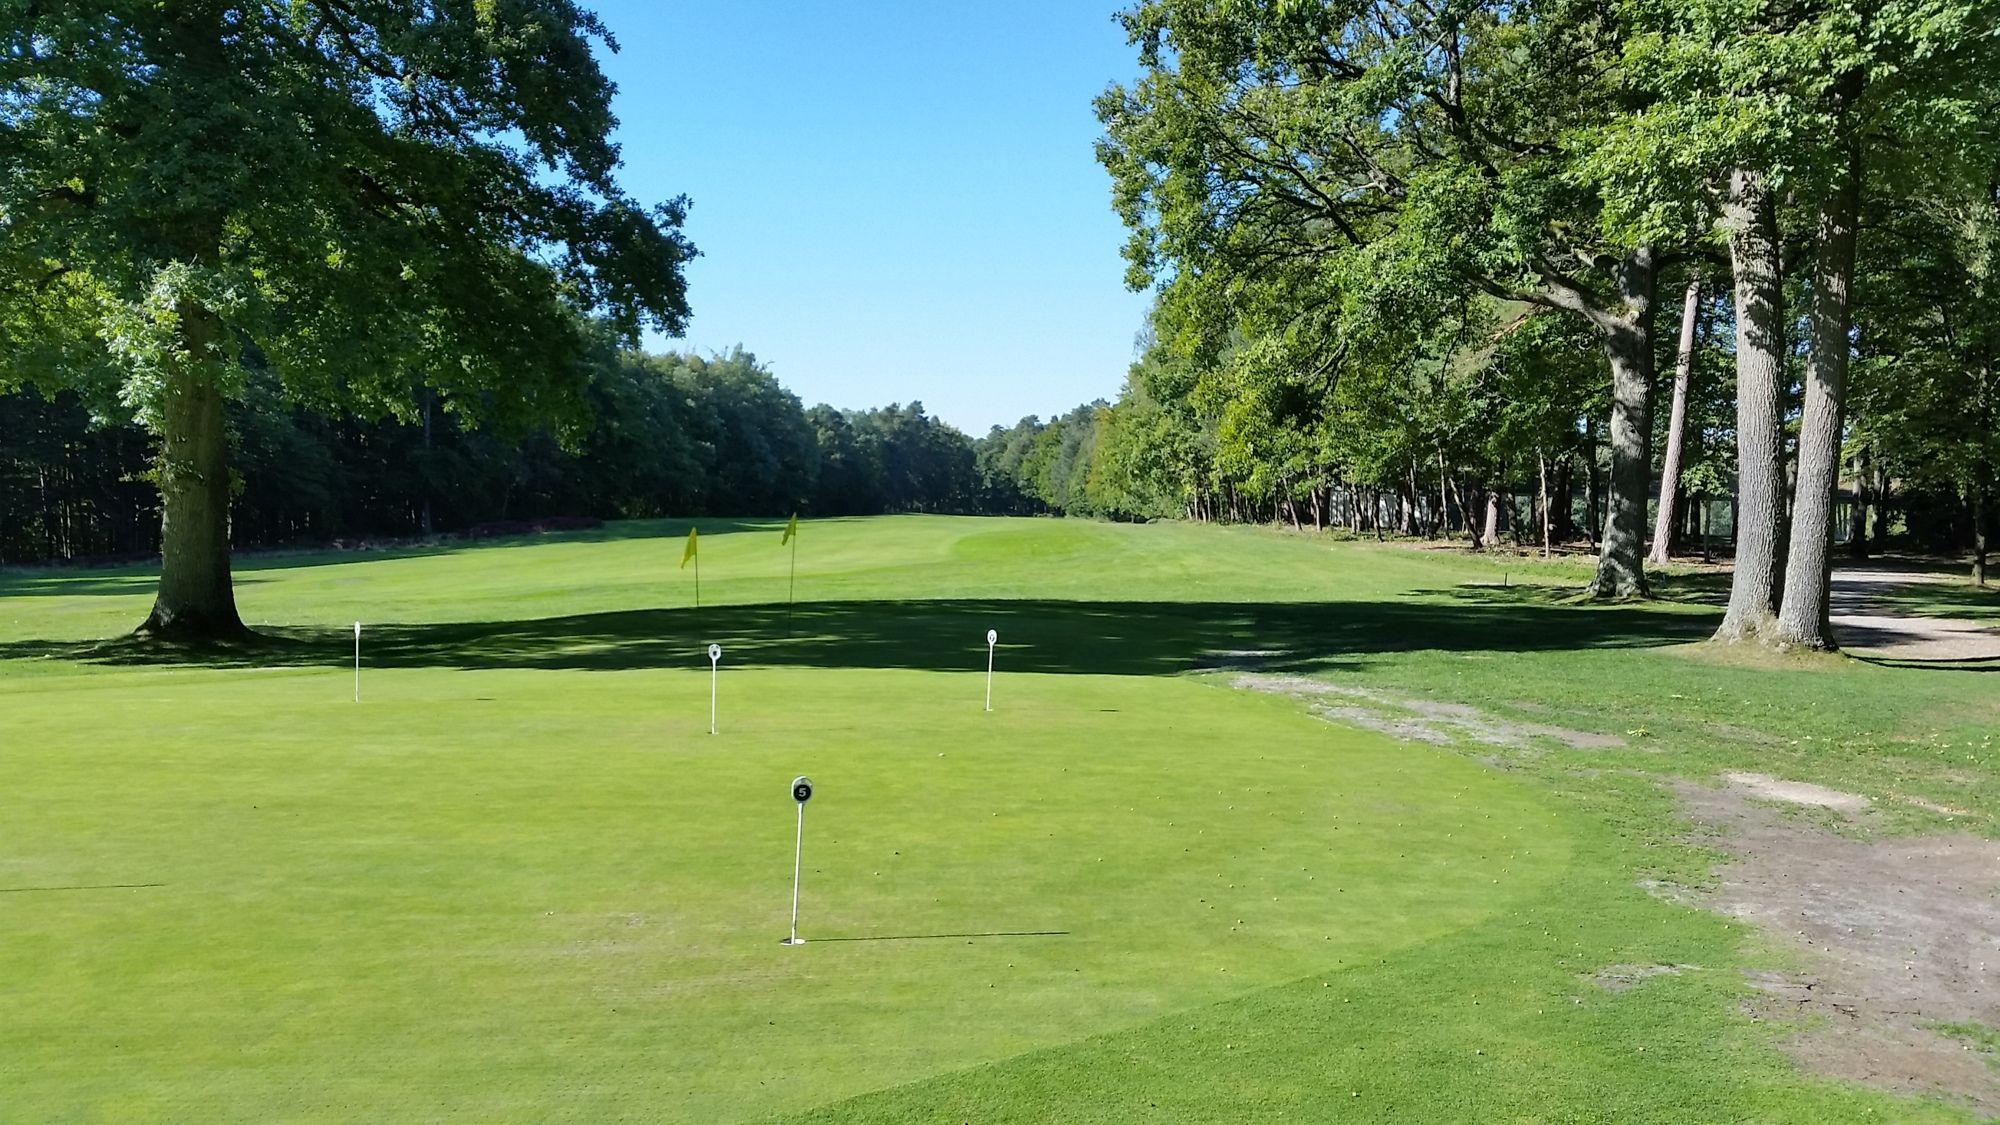 Royal Golf Club des Fagnes has lots of the preferred golf course in Rest of Belgium